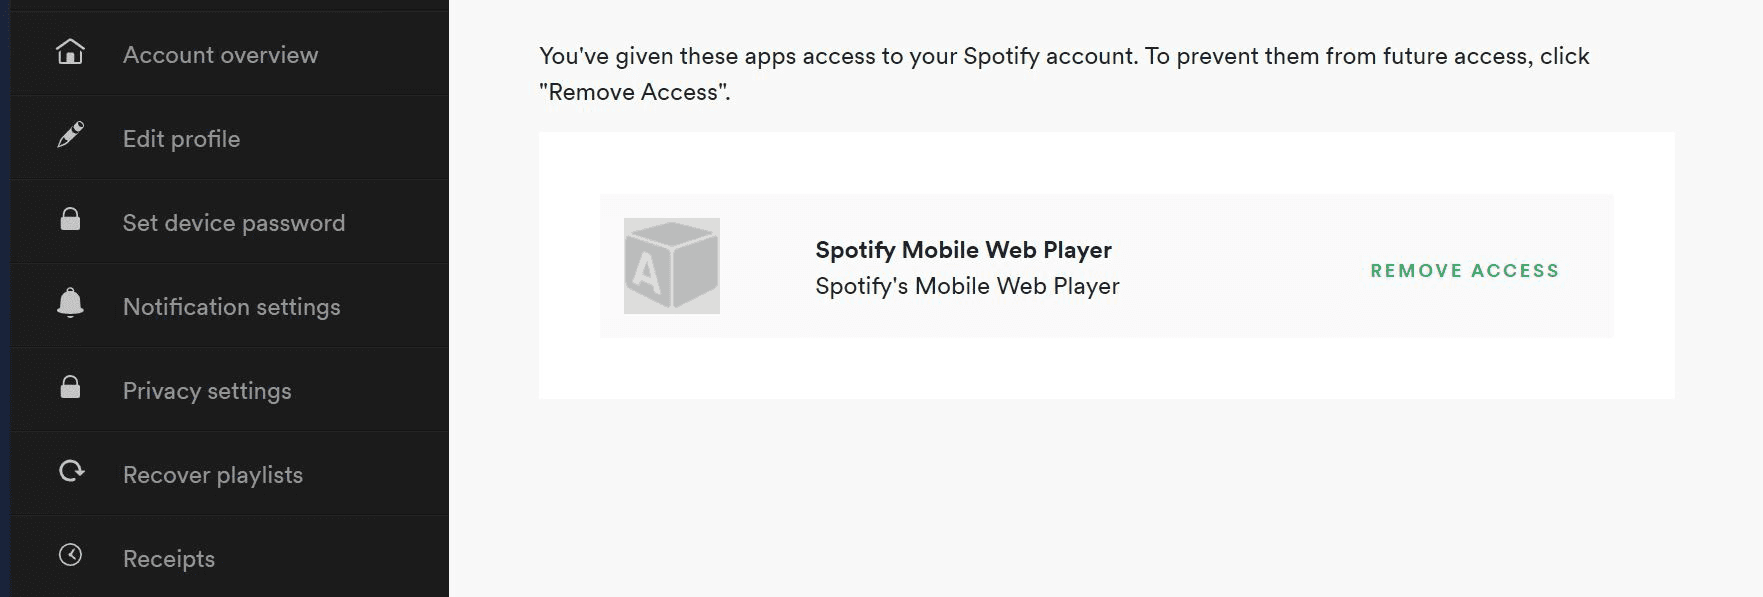 Remove access to third-party apps